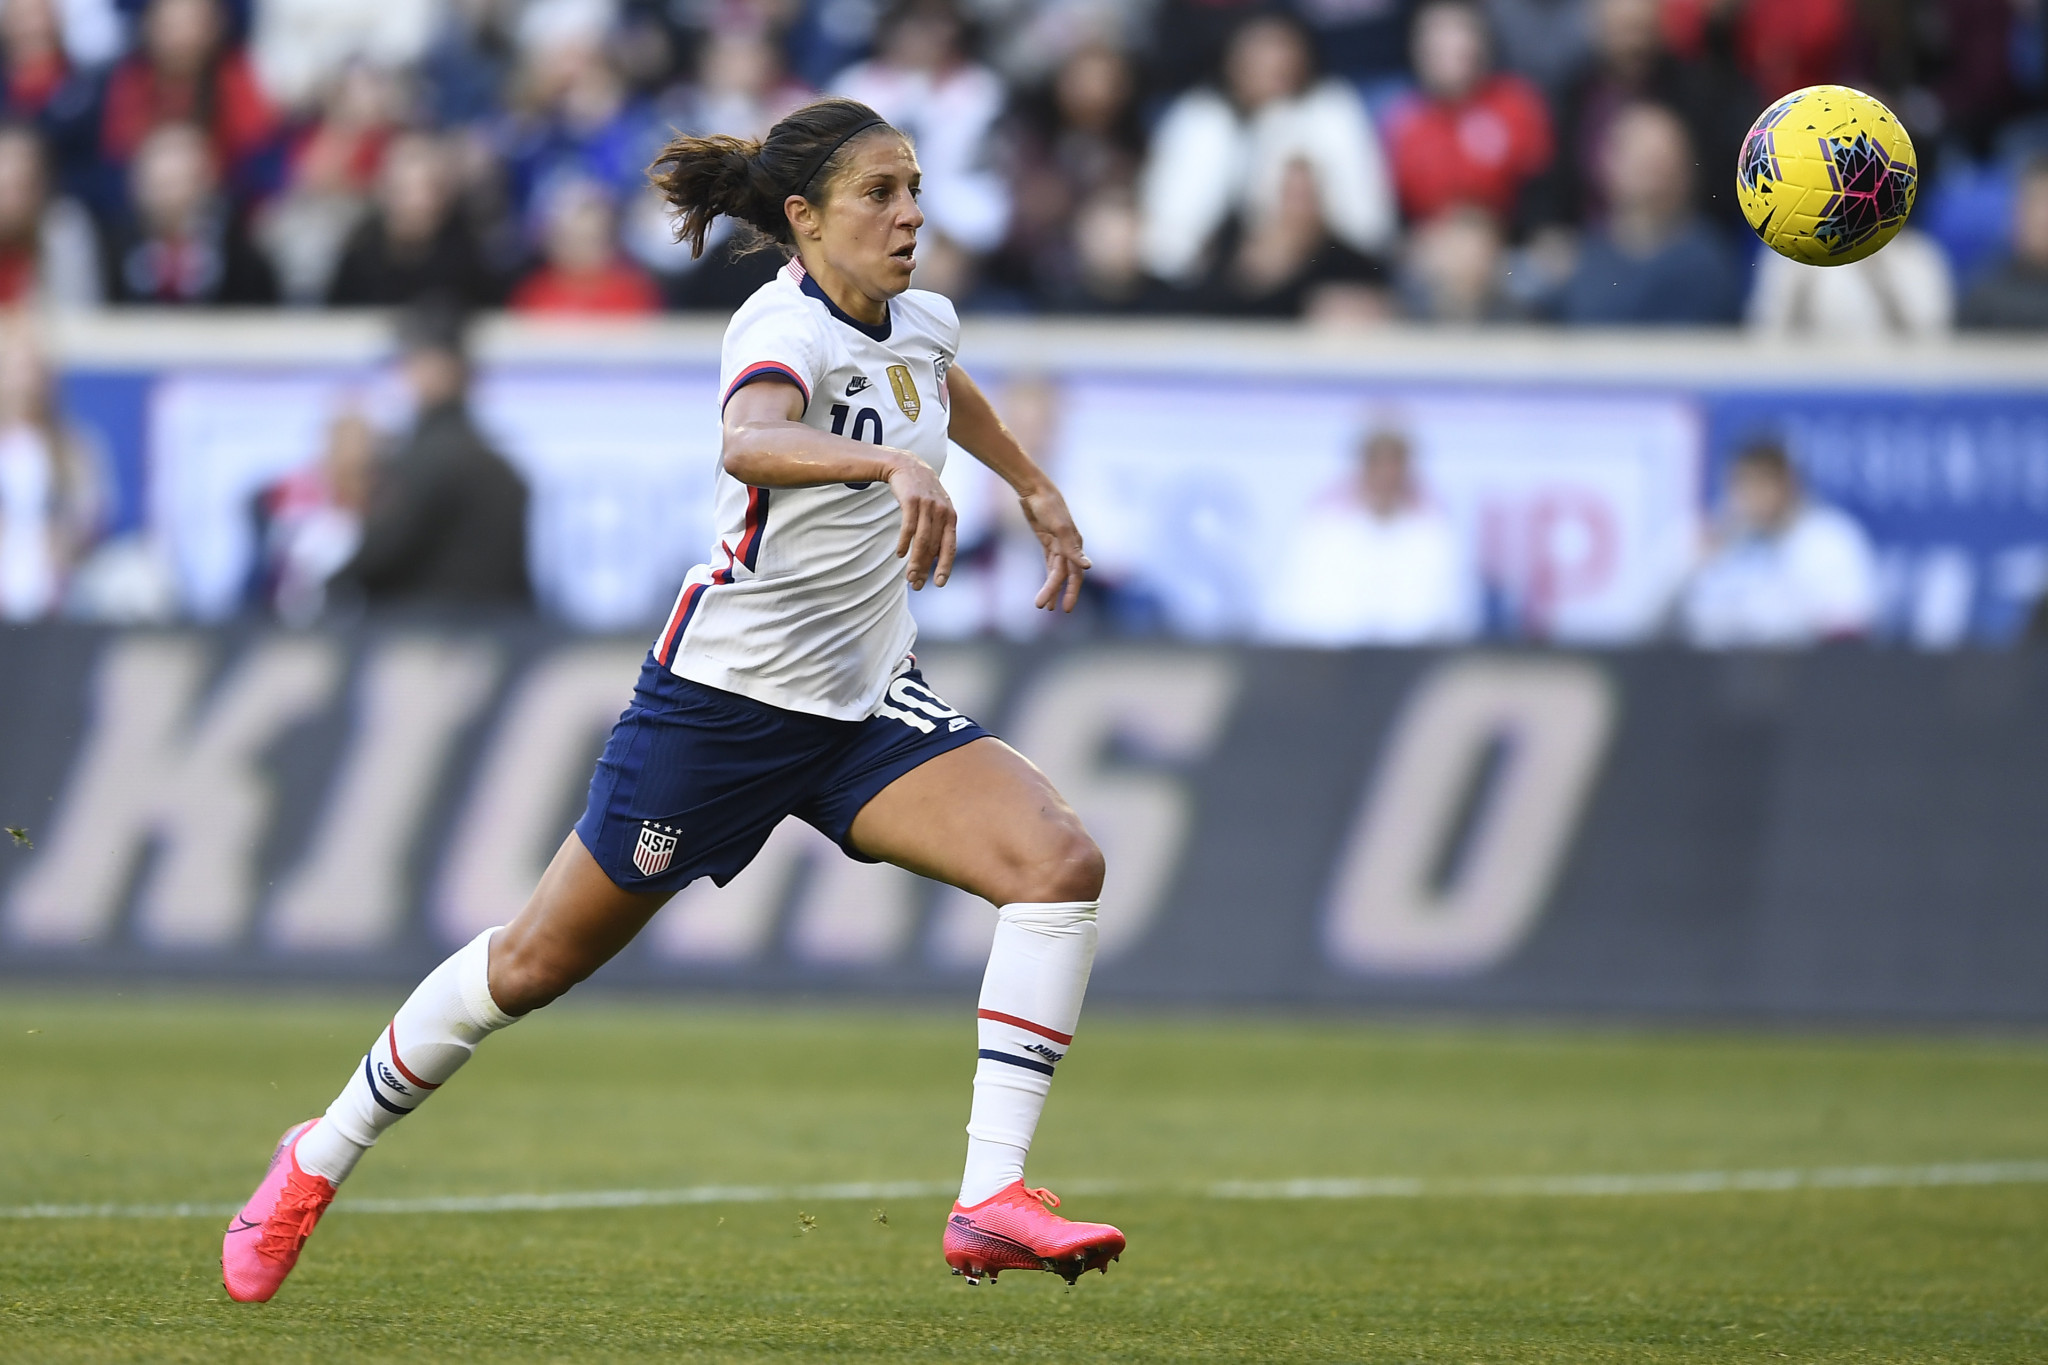 Carli Lloyd has announced her intention to retire after Tokyo 2020 ©Getty Images